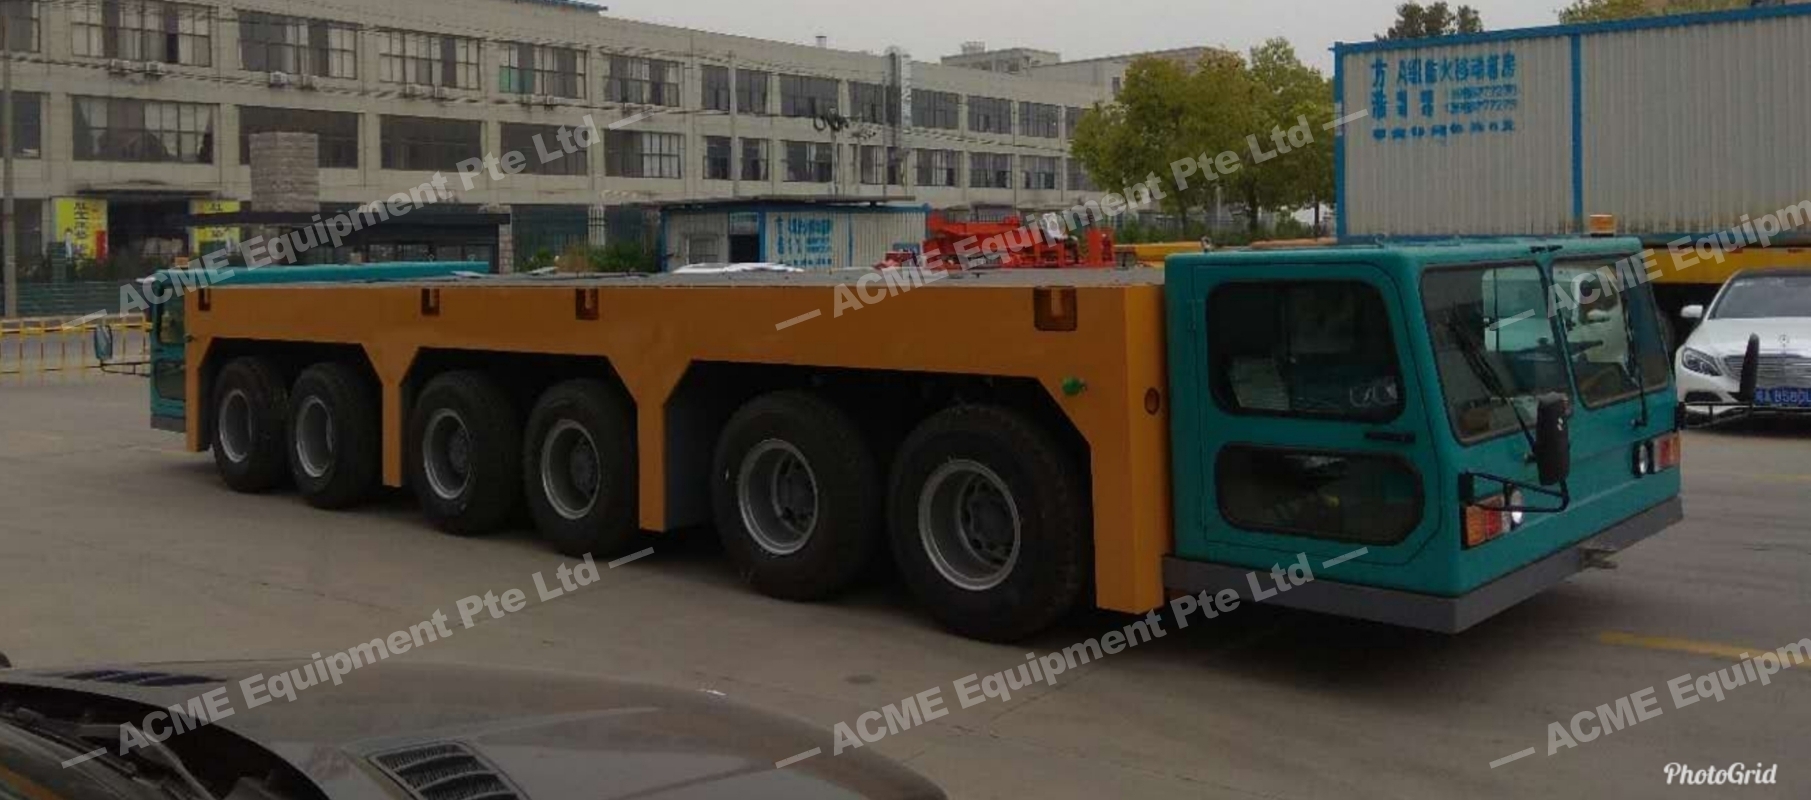 Modular Transporter Acme Equipment Special Projects